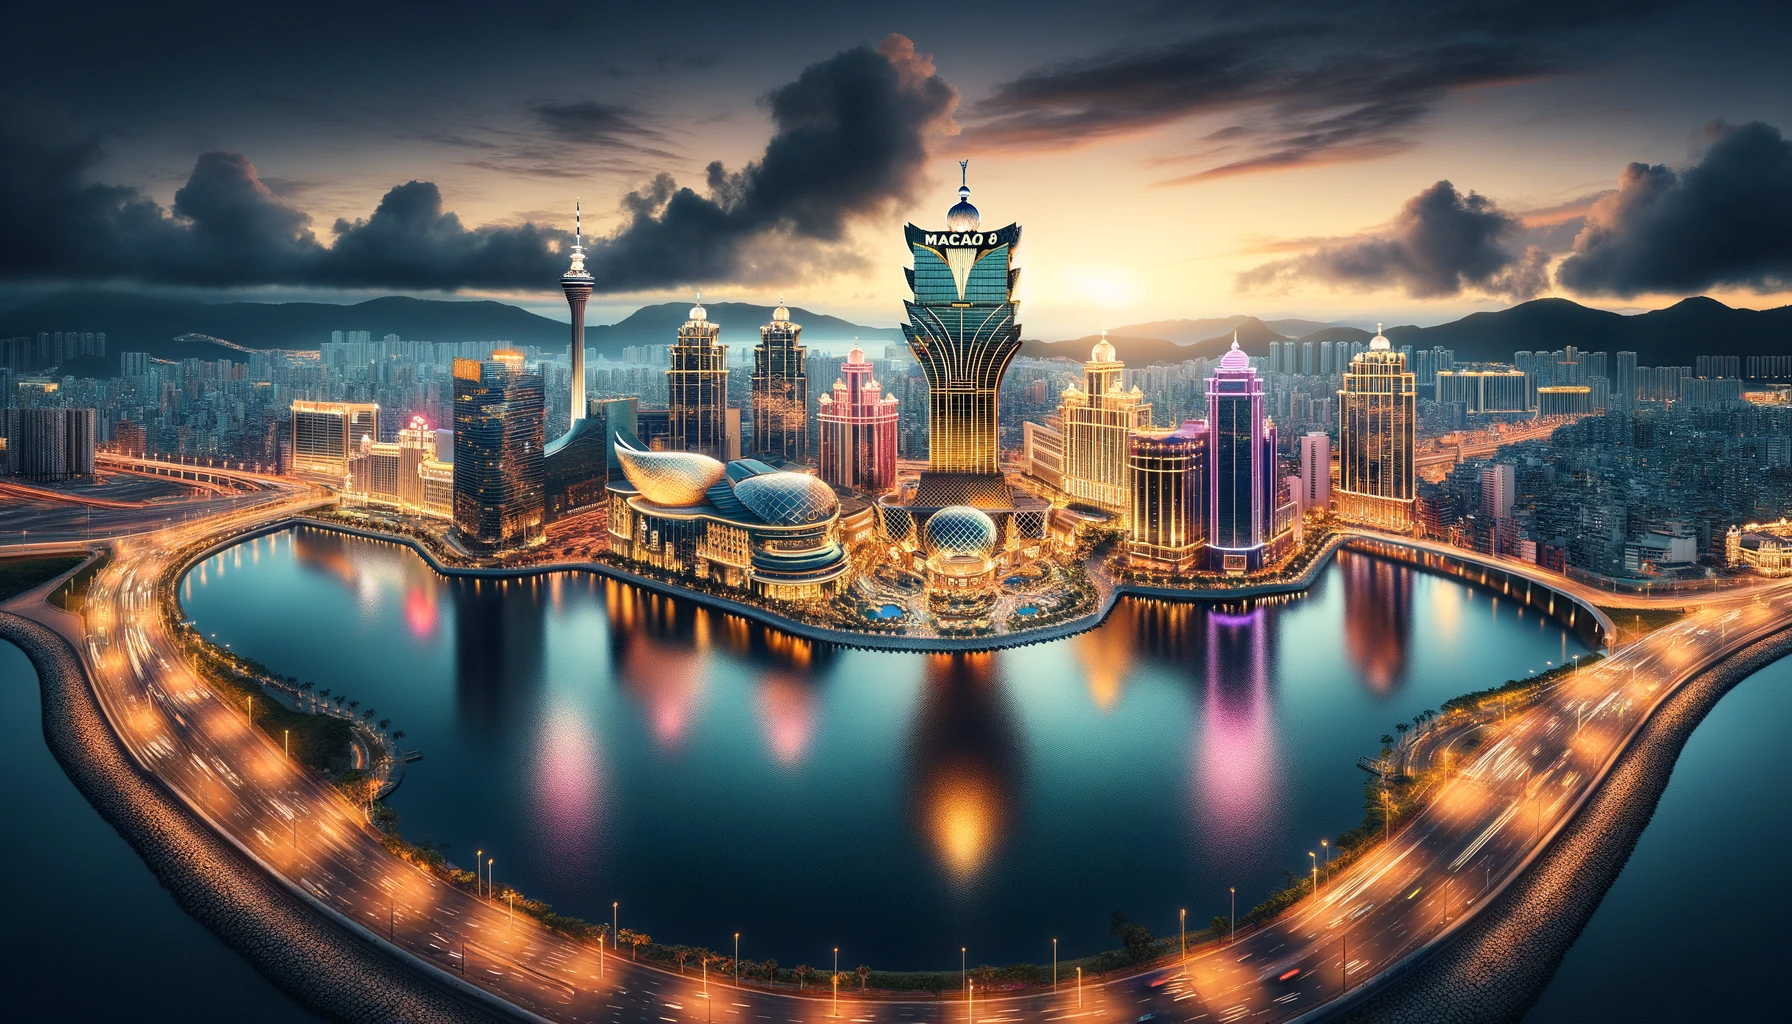 This image shows the panoramic view of Macao's iconic skyline and casino resorts, brilliantly illuminated at night, highlighting the city's status as a premier gaming destination in Asia.